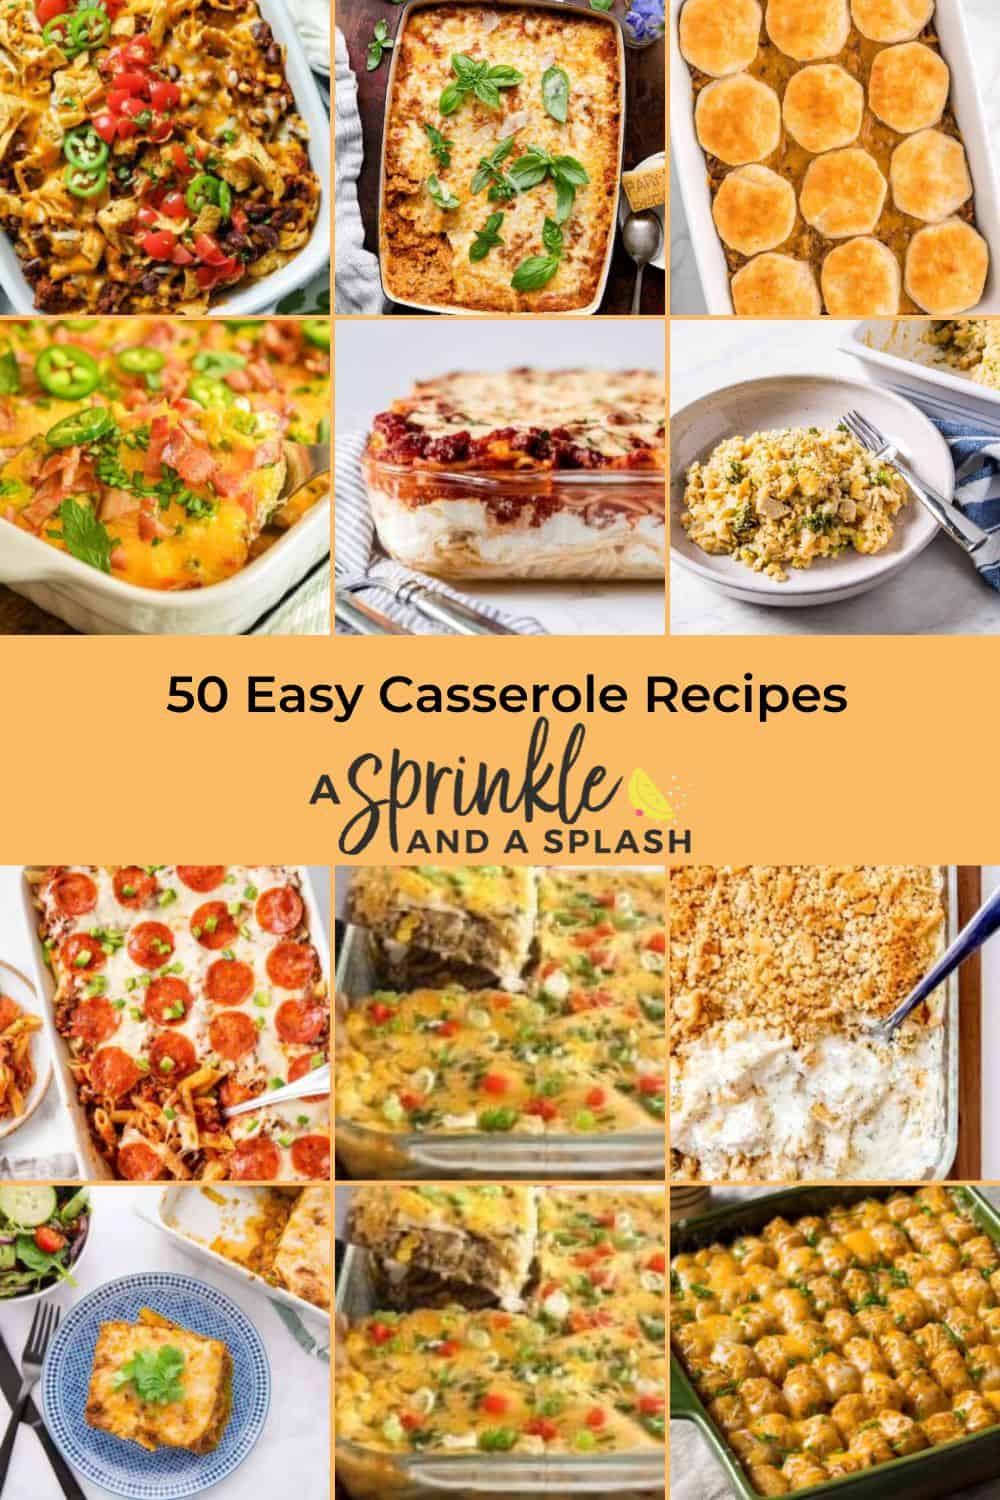 50 Casserole Recipes Your Family Will Love - A Sprinkle and A Splash